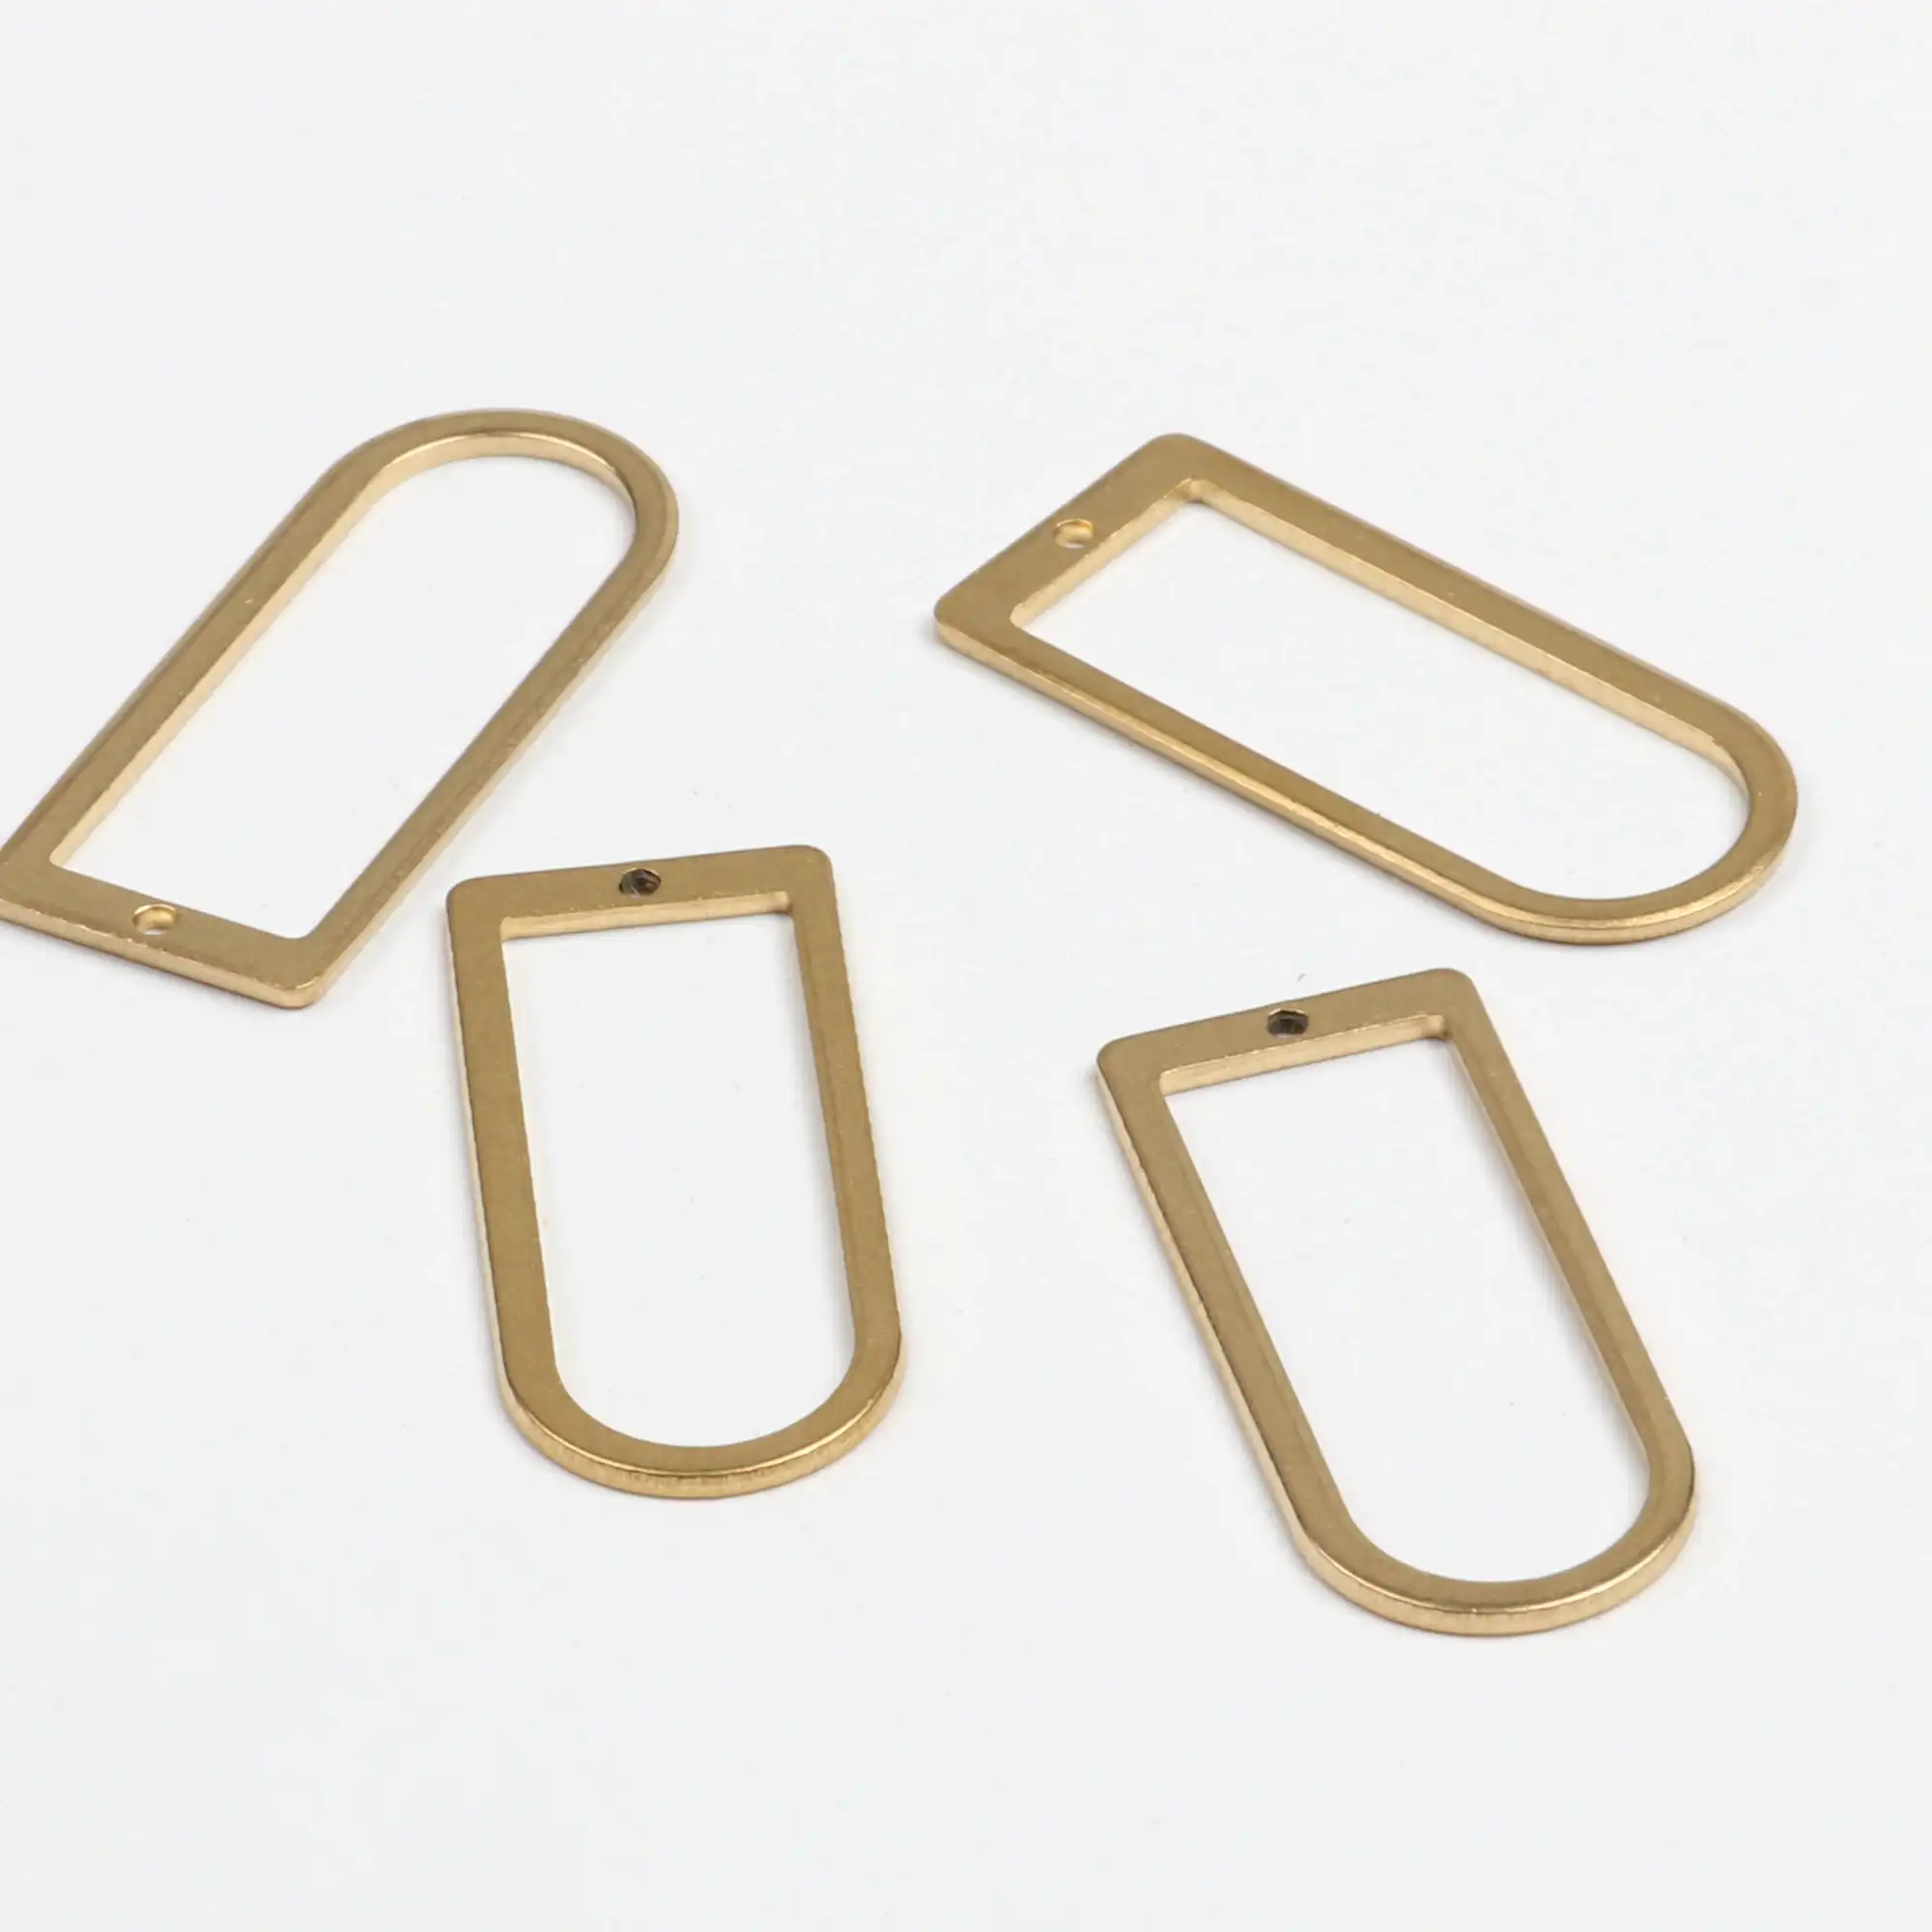 Geometry Stampings Raw Brass Pendants  A1-7815 Raw Brass Findings Raw Brass Earring Findings 11x16.5mm Raw Brass Triangle Charms